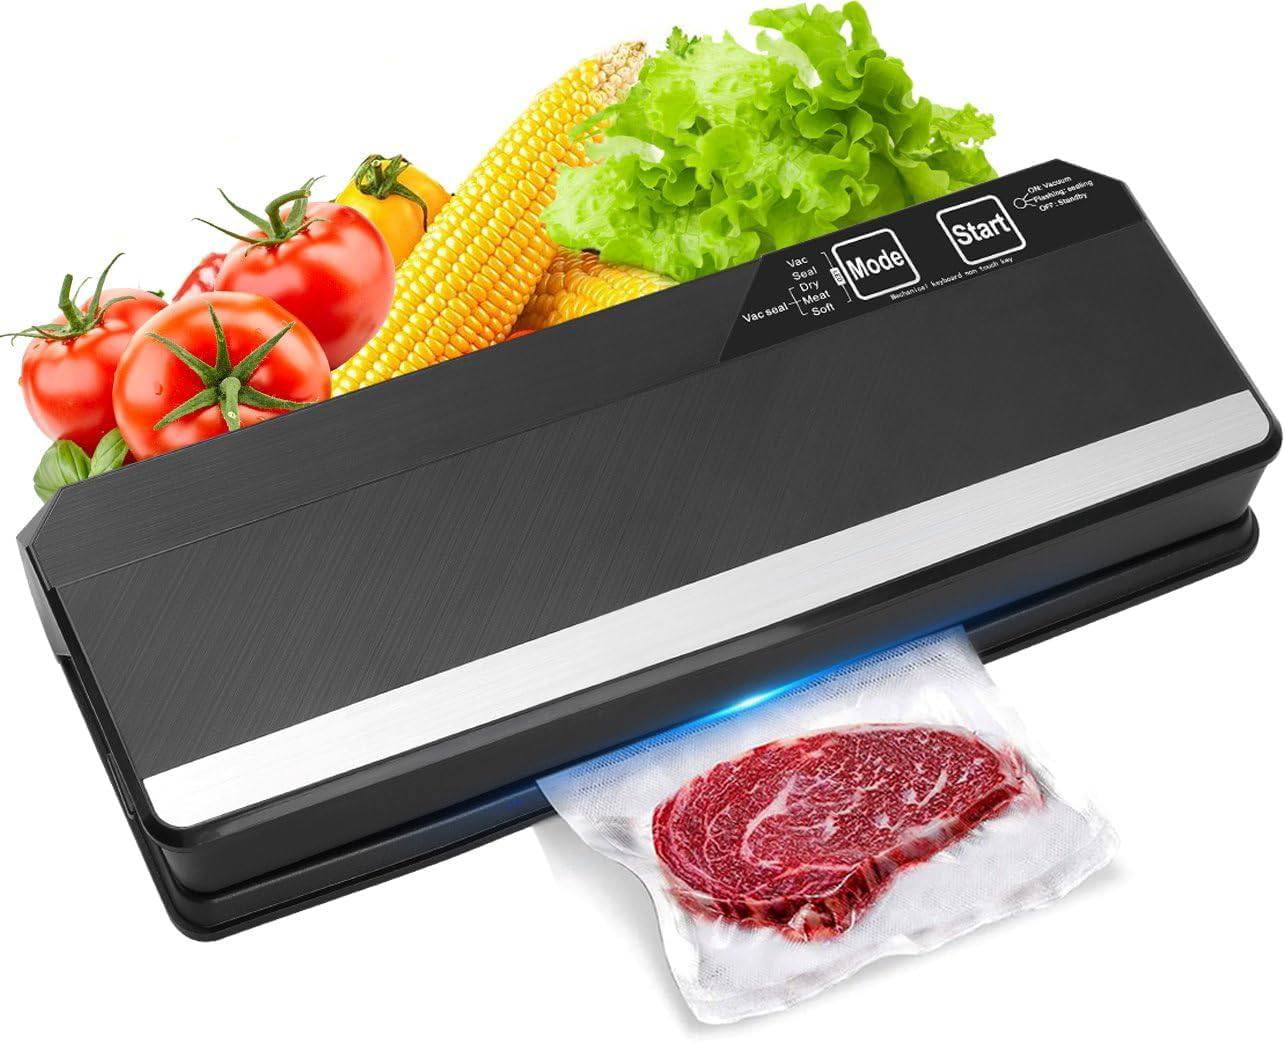 Automatic Vacuum Sealer for Food Savers - Safety Compact Vacuum